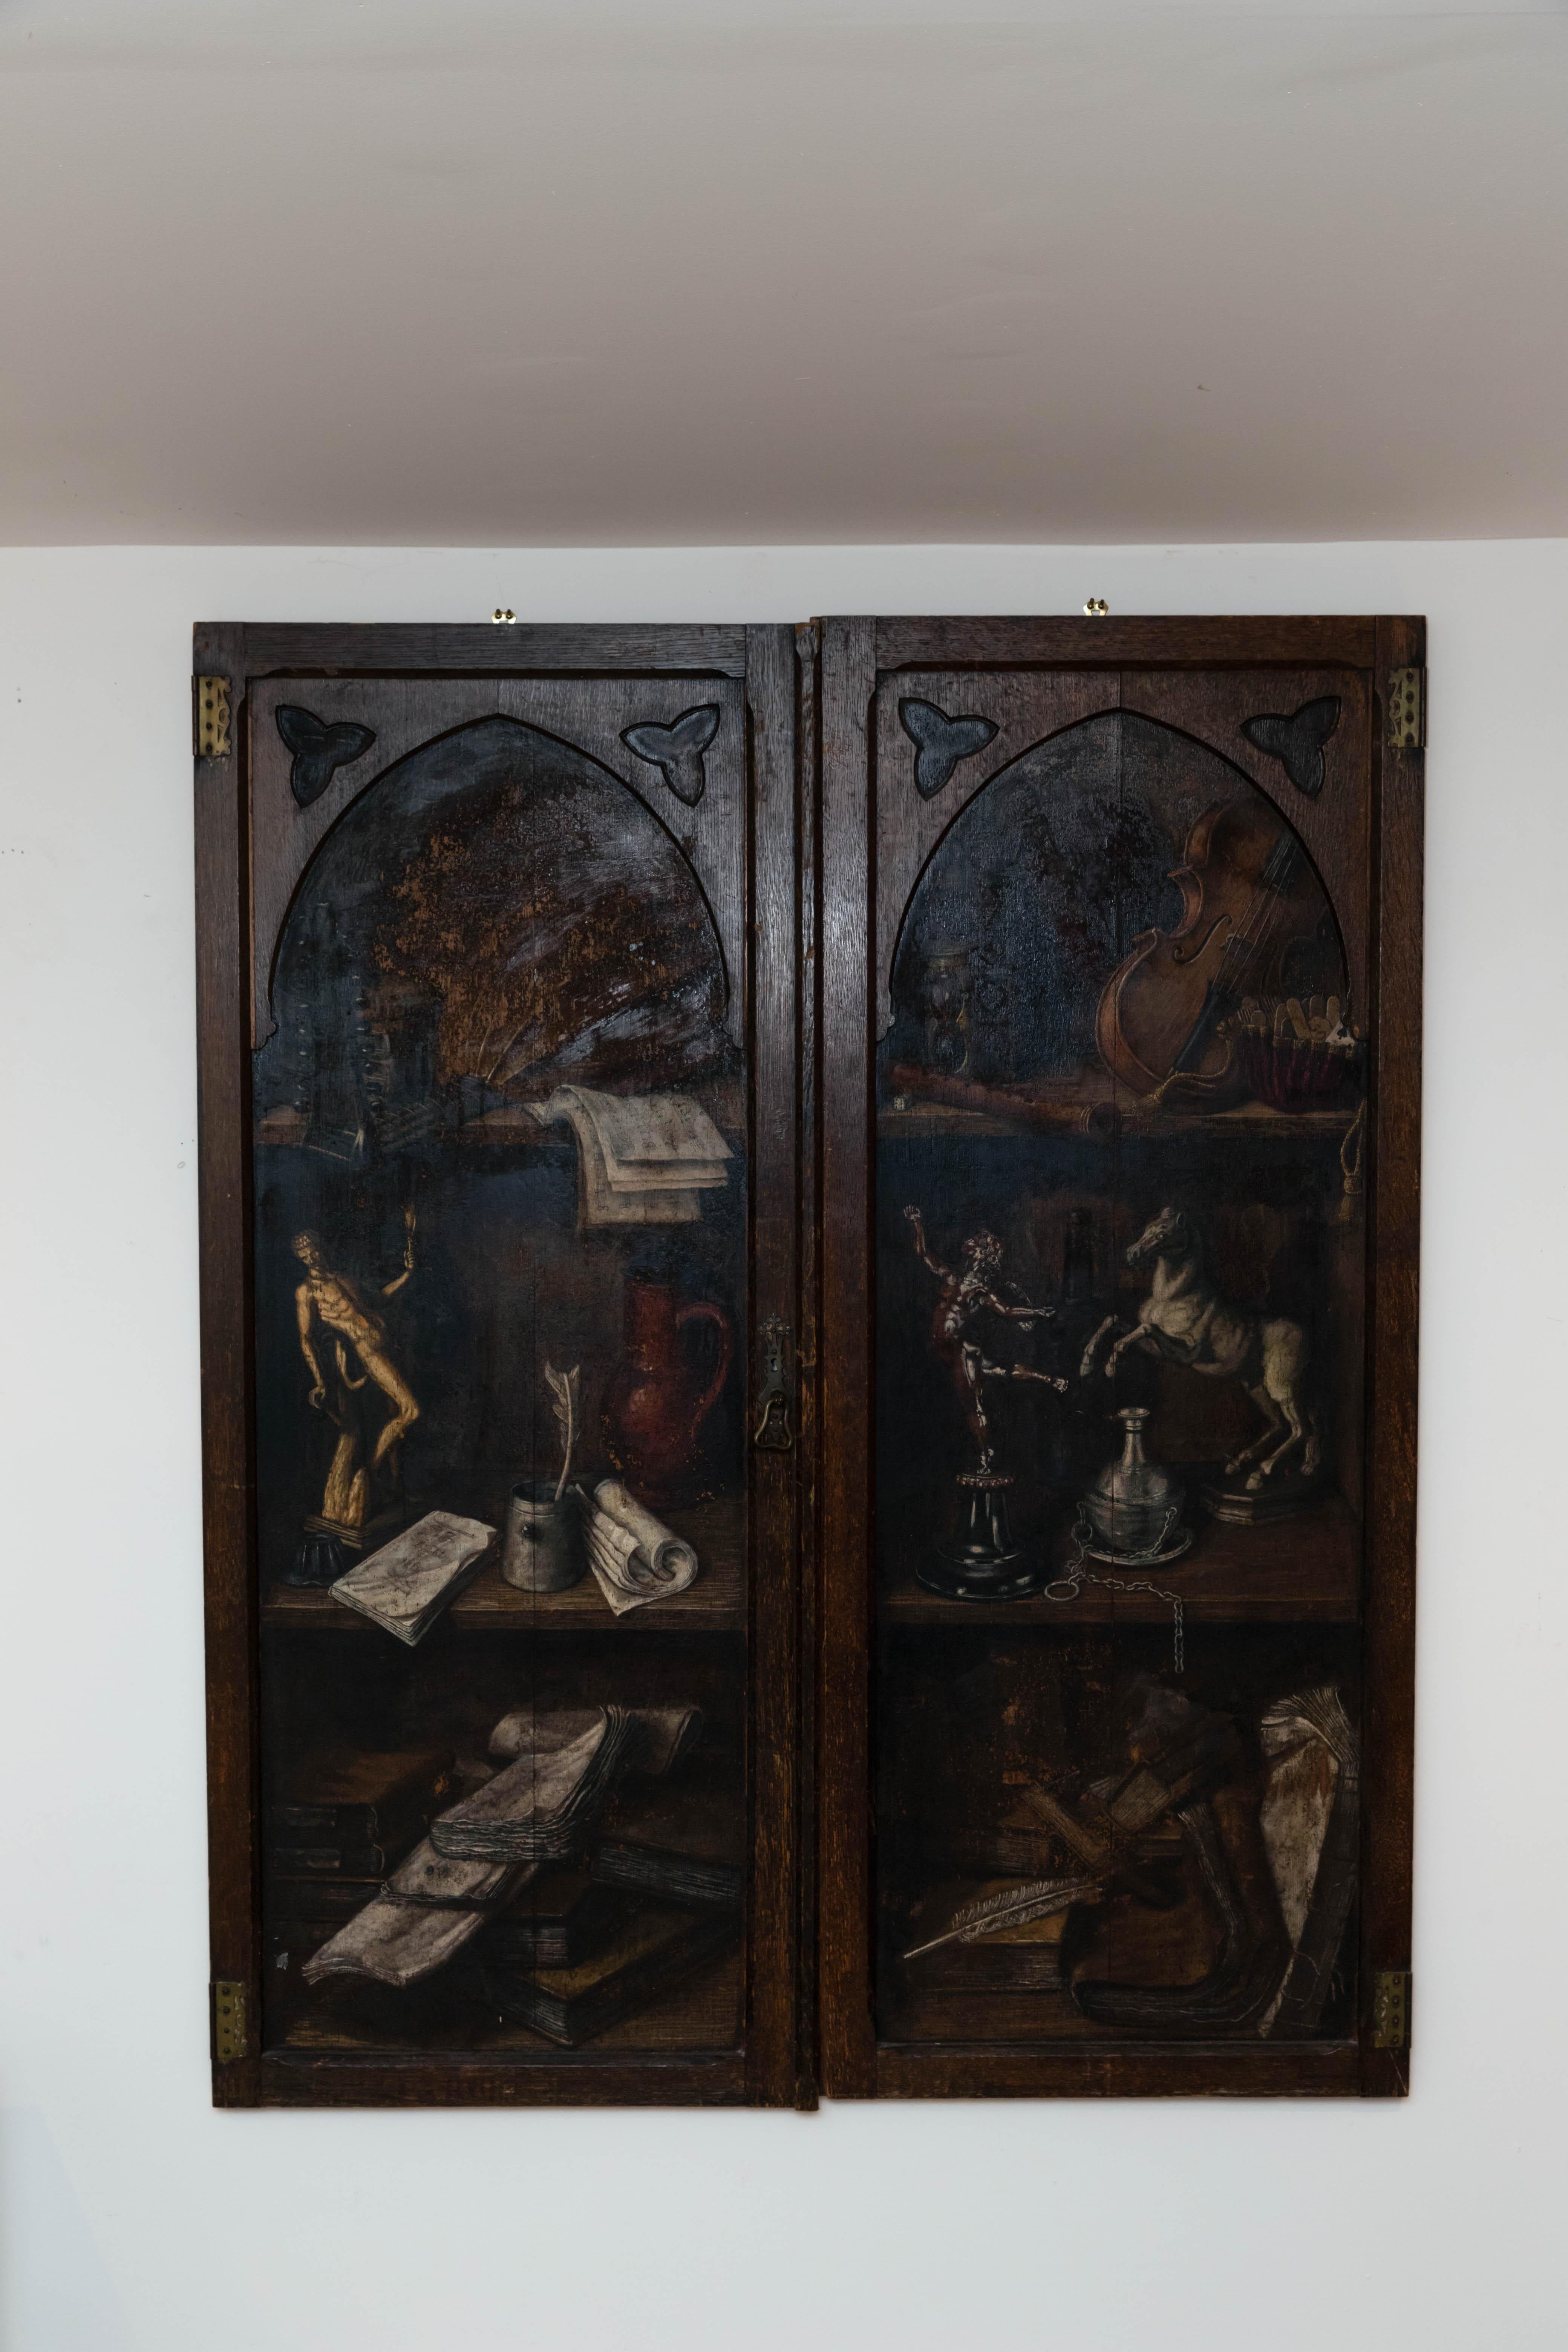 Pair of cabinet doors mounted into a wall hanging.